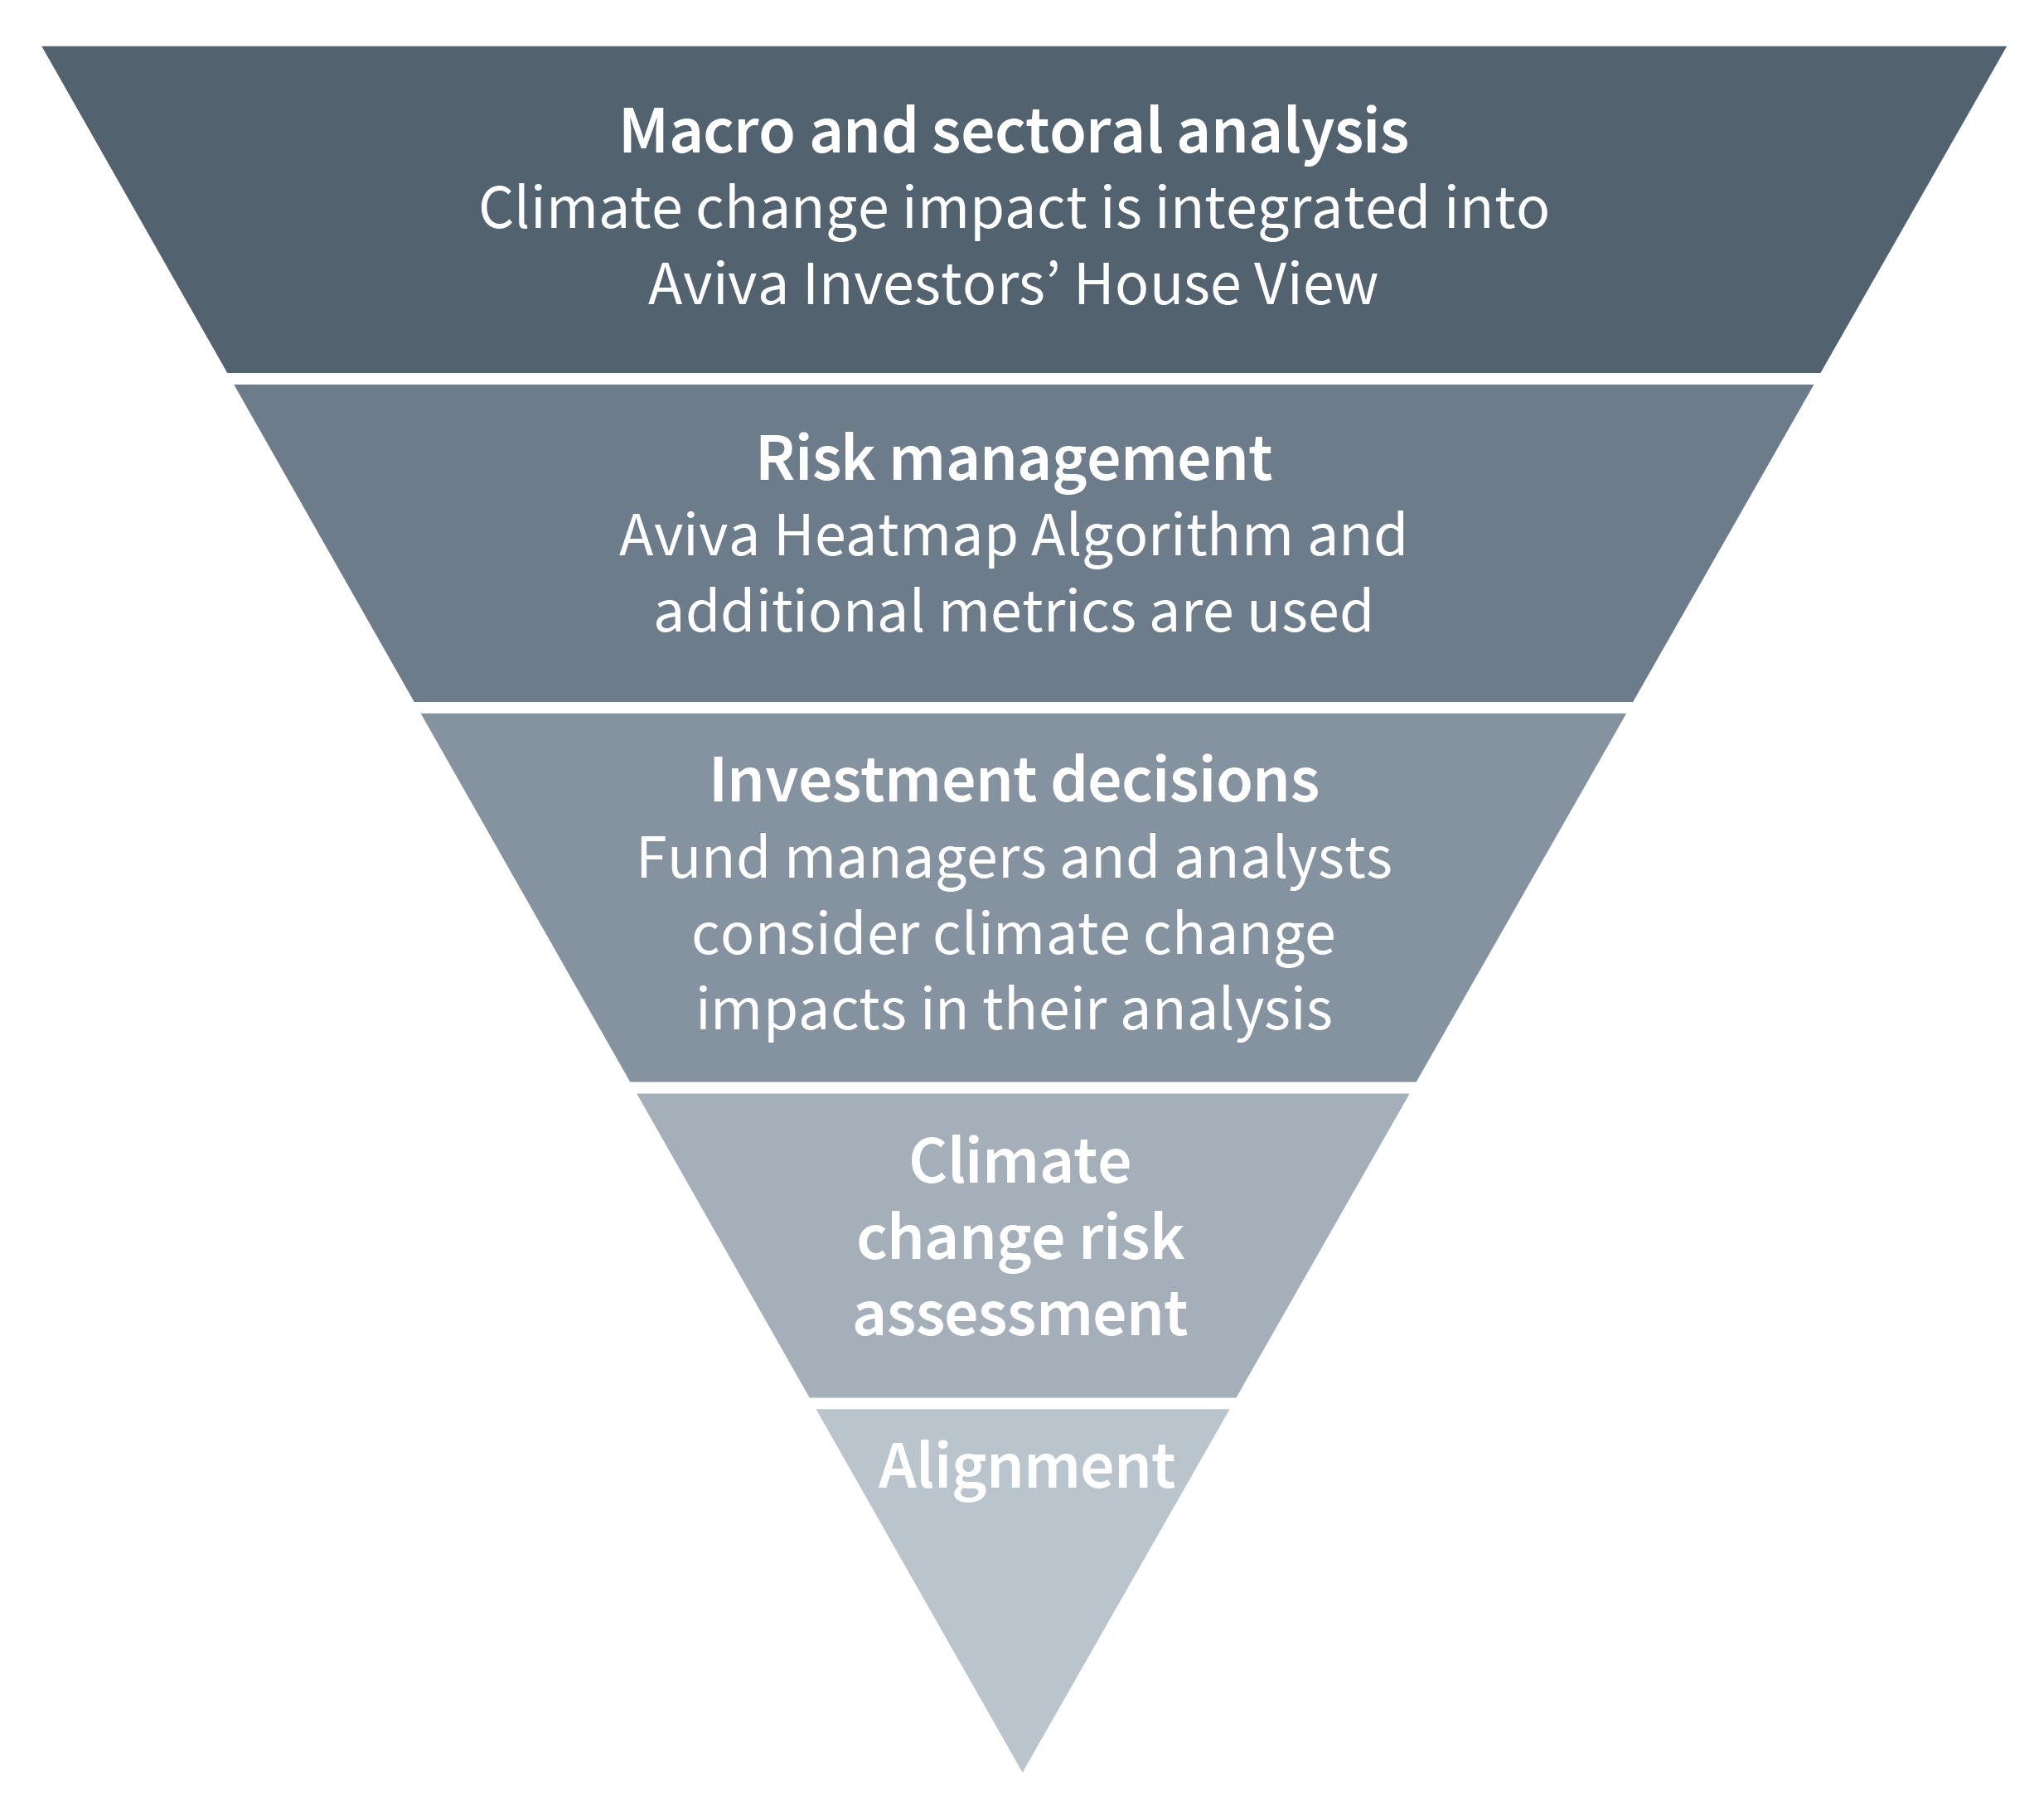 Integrating climate risk into investment considerations